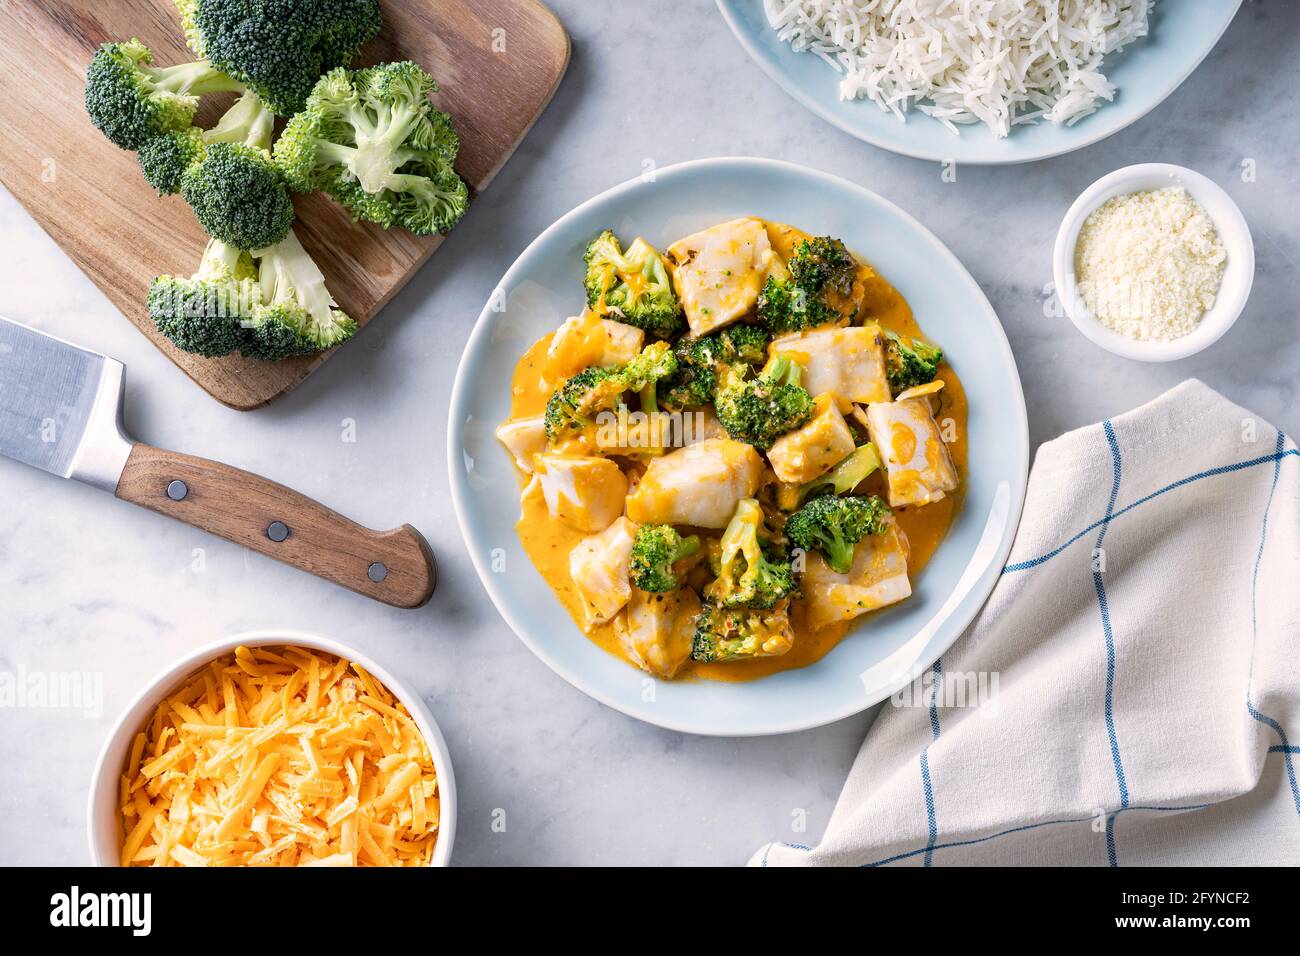 Delicious baked fish with broccoli and cheddar cheese. Stock Photo